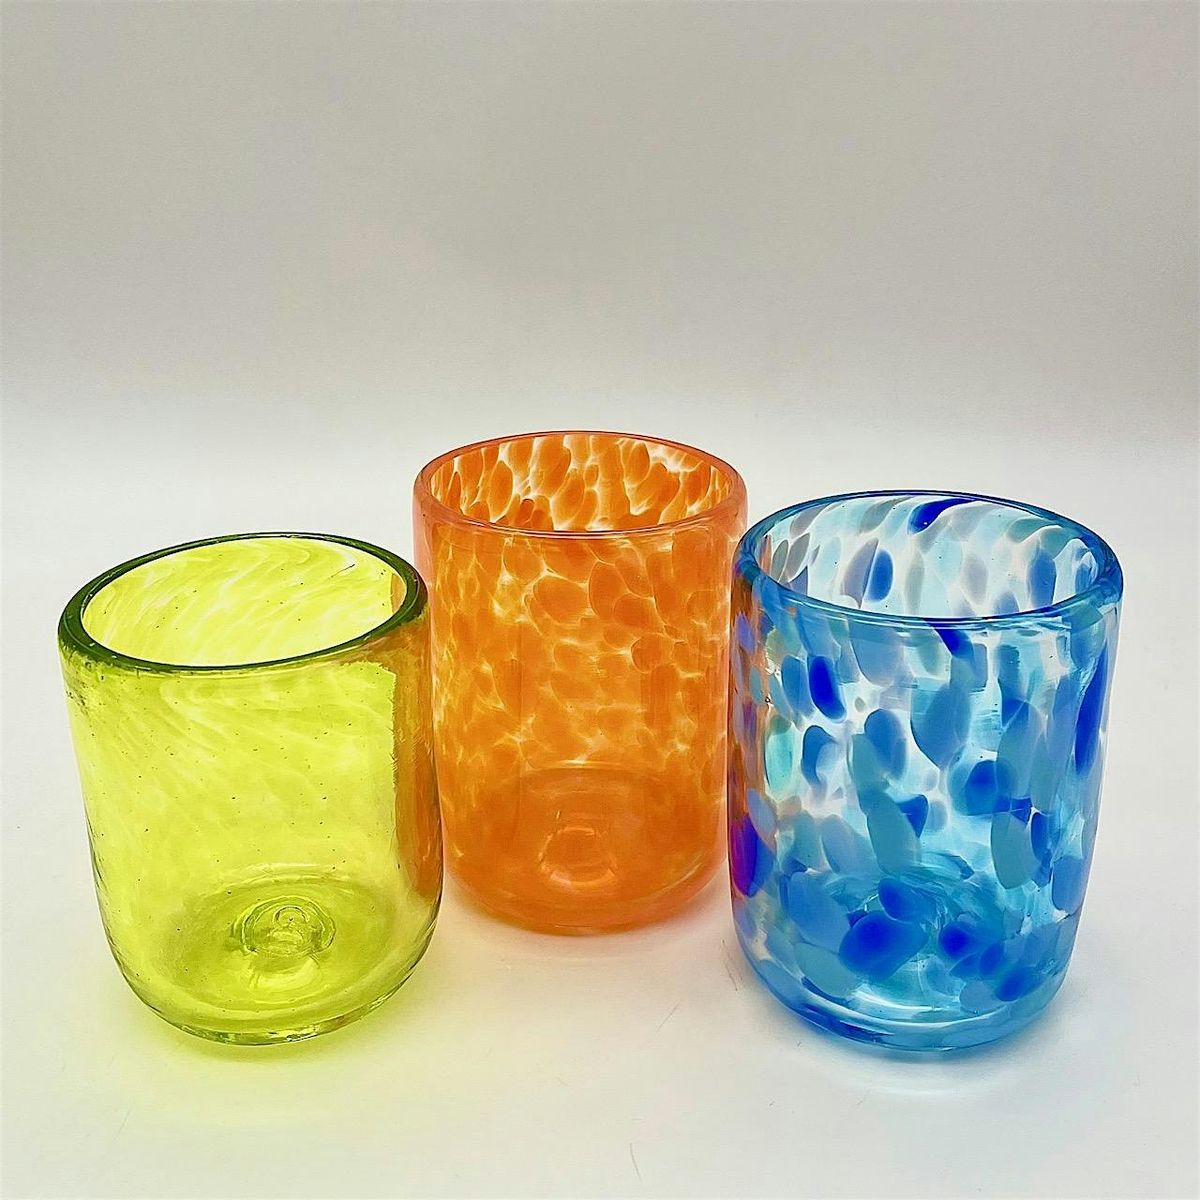 A Toast!! with your own Blown Glass!  It's all about you today.